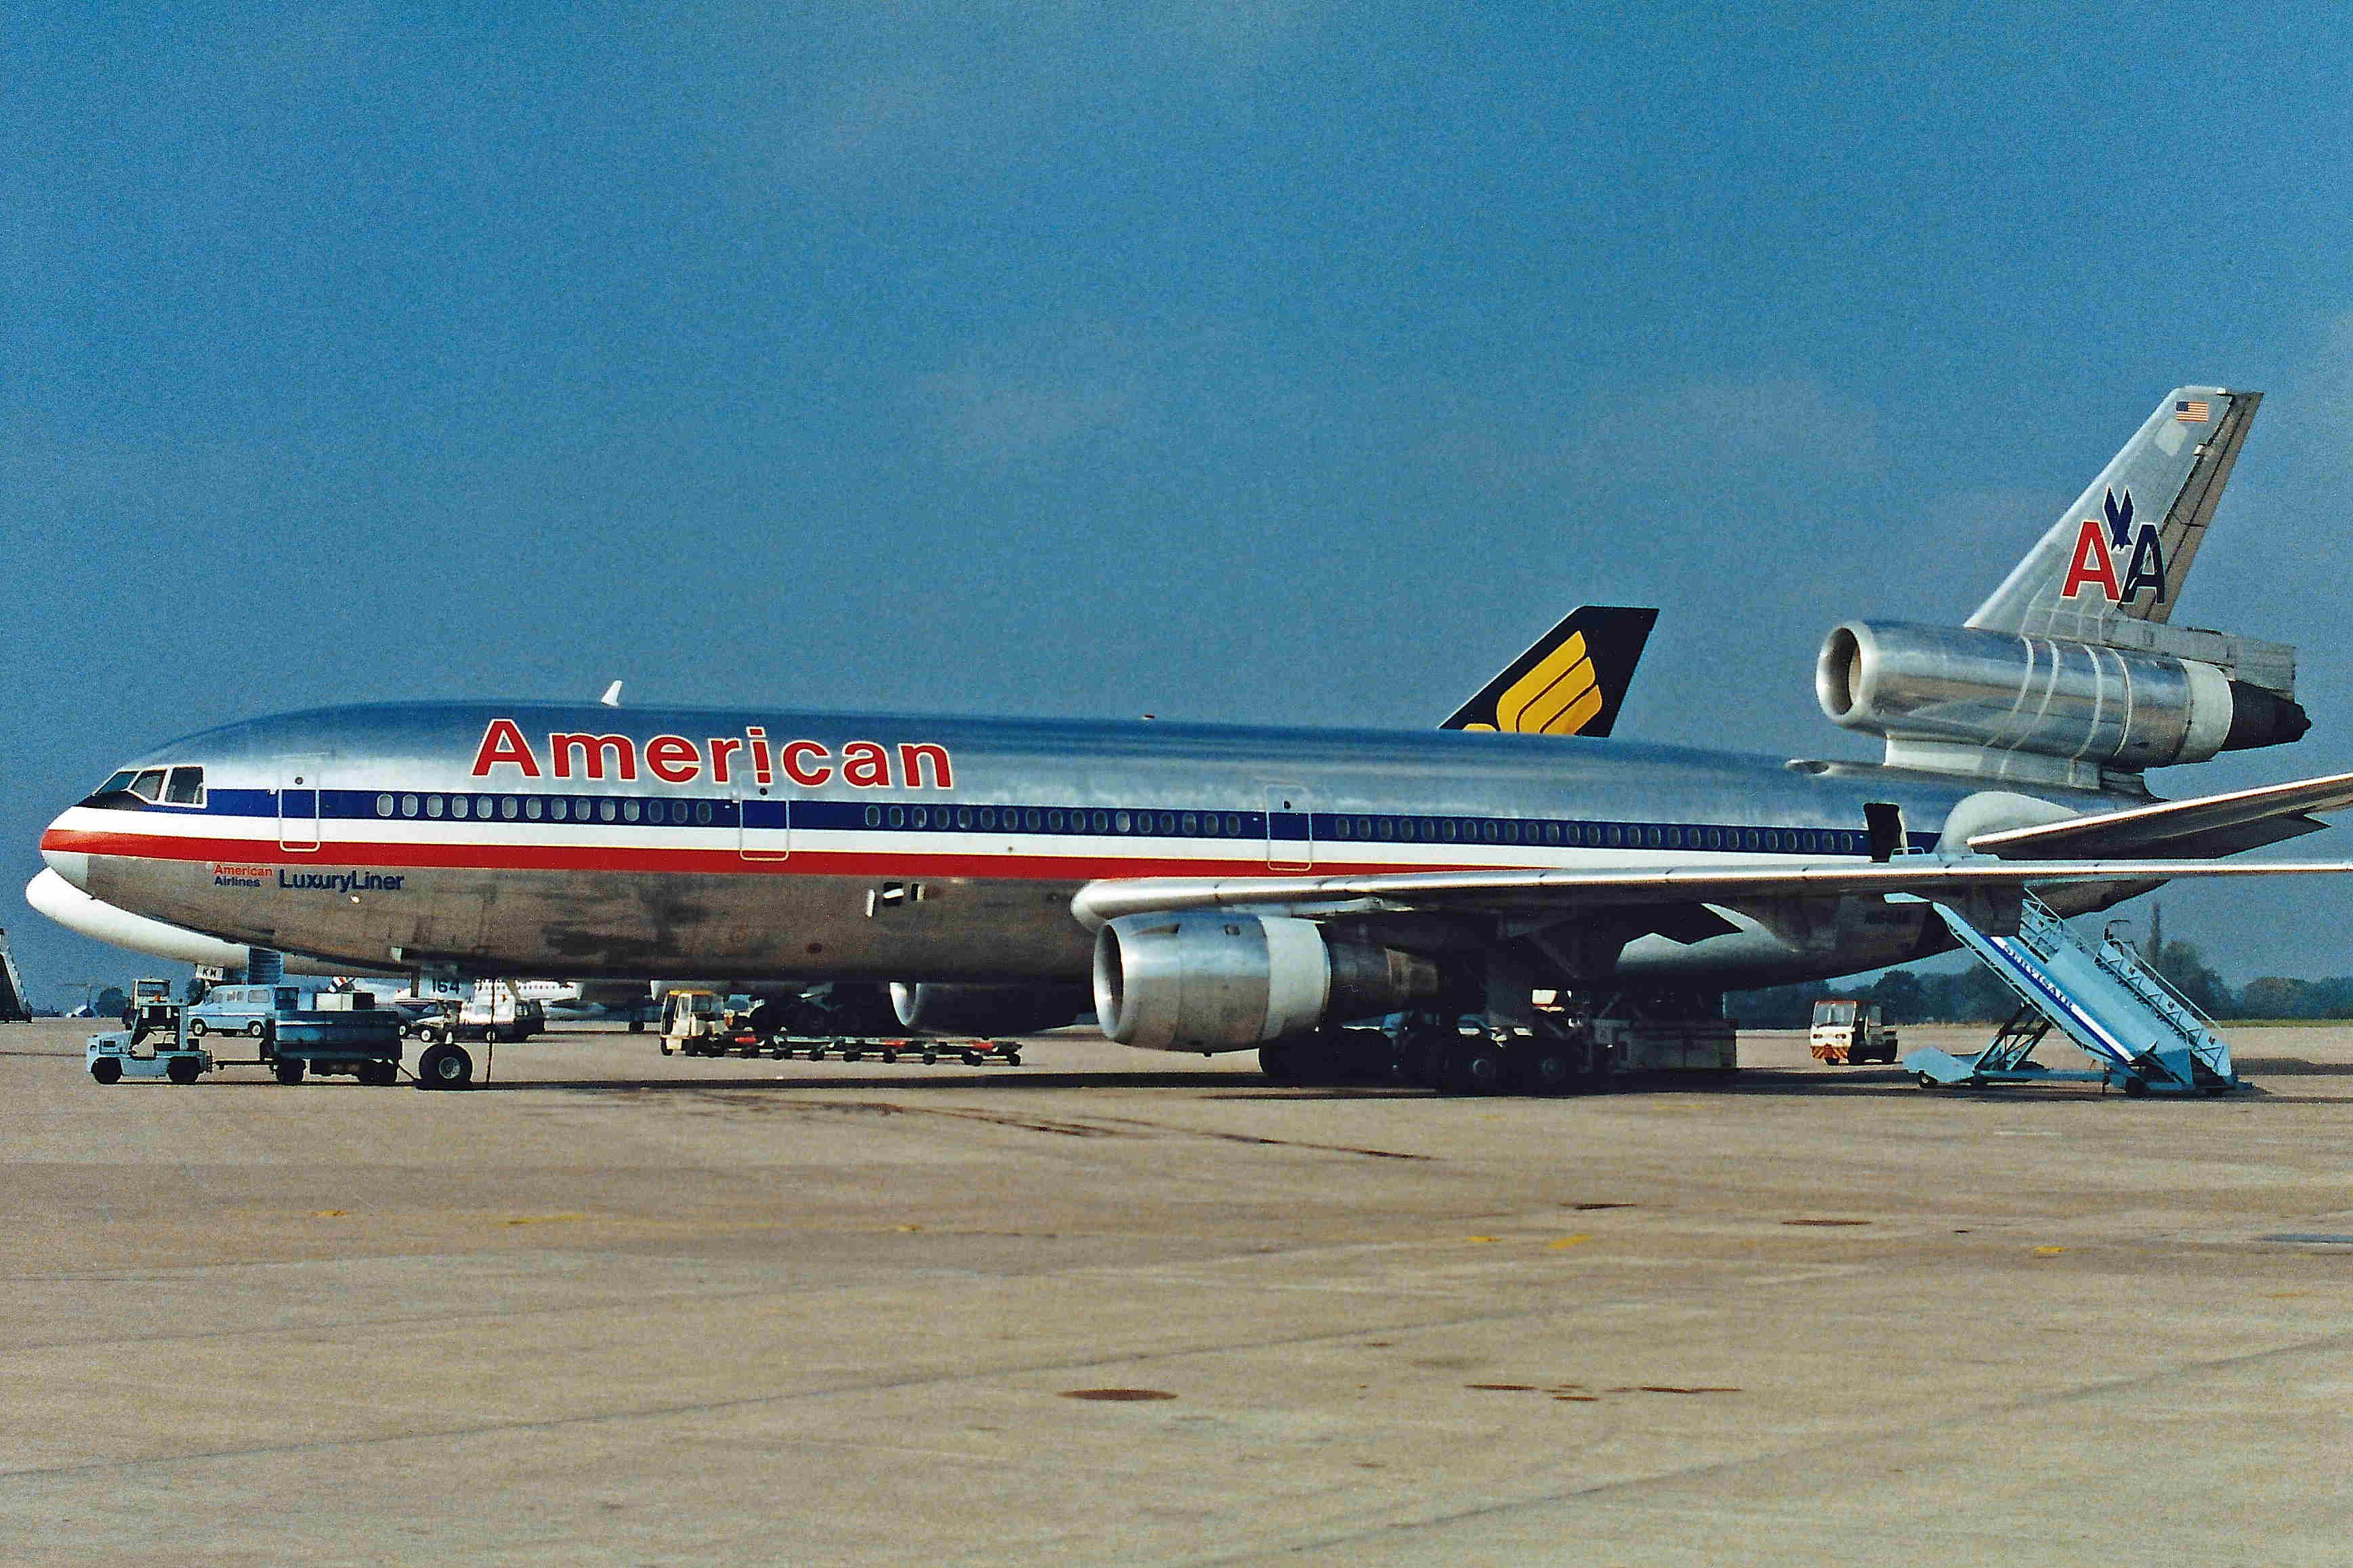 An American Airlines DC-10  on an airport apron parked next to a Singapore Airlines aircraft.